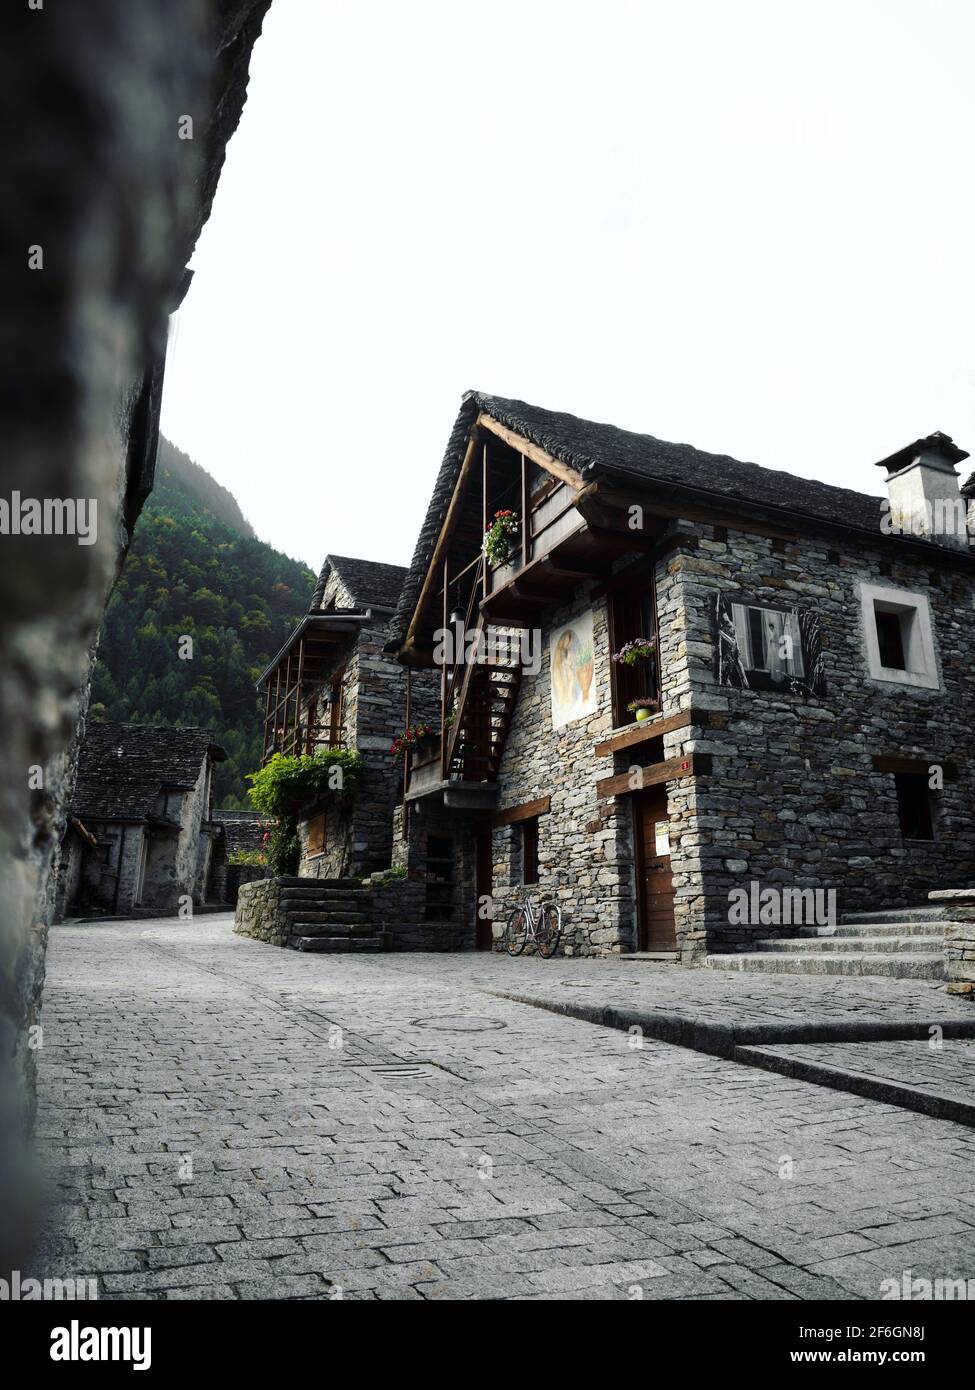 Panorama view of old historic traditional schist stone rock buildings houses in picturesque quaint charming village Sonogno Verzasca Valley Locarno Ti Stock Photo